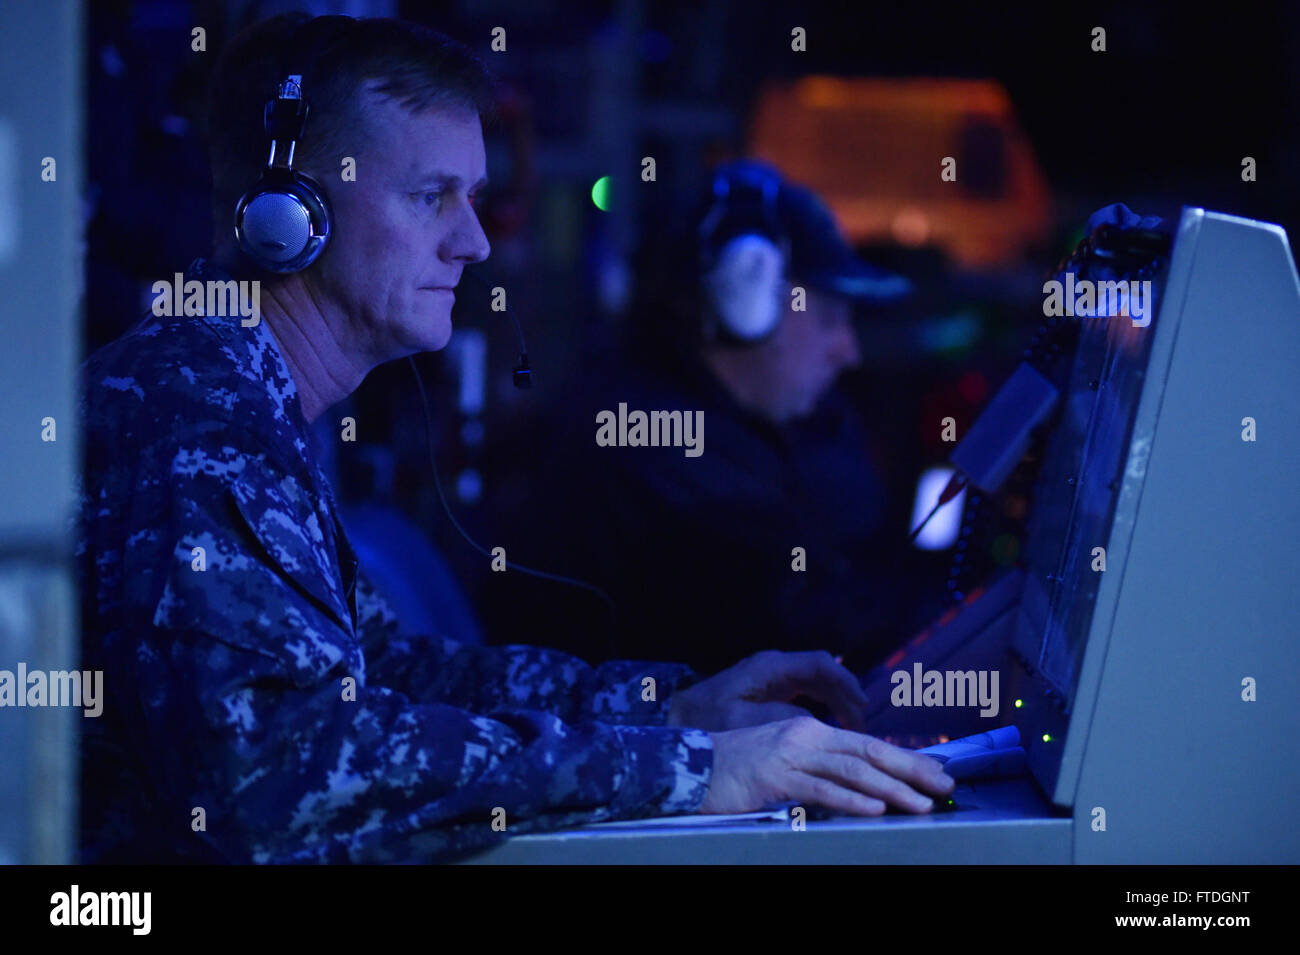 151020-N-XT273-195 ATLANTIC OCEAN (Oct. 20, 2015) Capt. Jeffrey Wolstenholme commodore of Task Force Sixty Four (CTF 64), monitors Hebrides Range communication in the combat information center during the Maritime Theater Missile Defense (MTMD) Forum's at Sea Demonstration (ASD-15) countdown aboard the Arleigh Burke-class destroyer USS Ross (DDG 71).  Ships from Canada, France, Italy, The Netherlands, Norway, Spain, United Kingdom, and the United States tracked and destroyed target ballistic and anti-ship cruise missiles during the demonstration's six-live fire scenarios. Germany provided perso Stock Photo